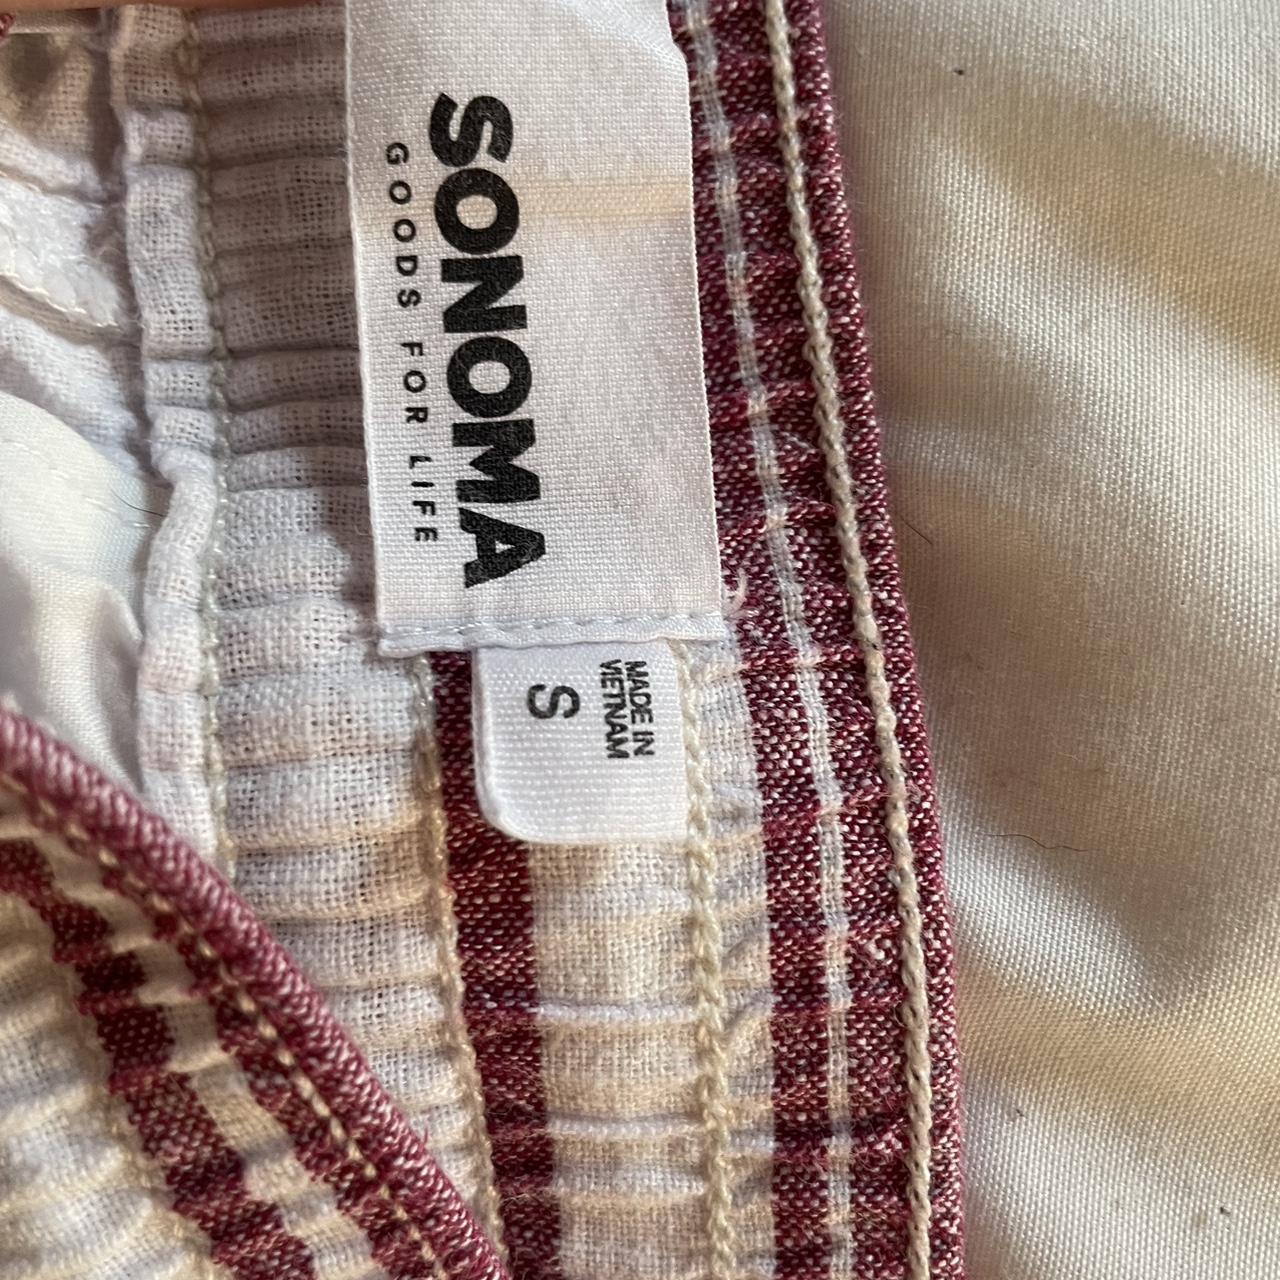 size small sonoma shorts , red and white stripes:)